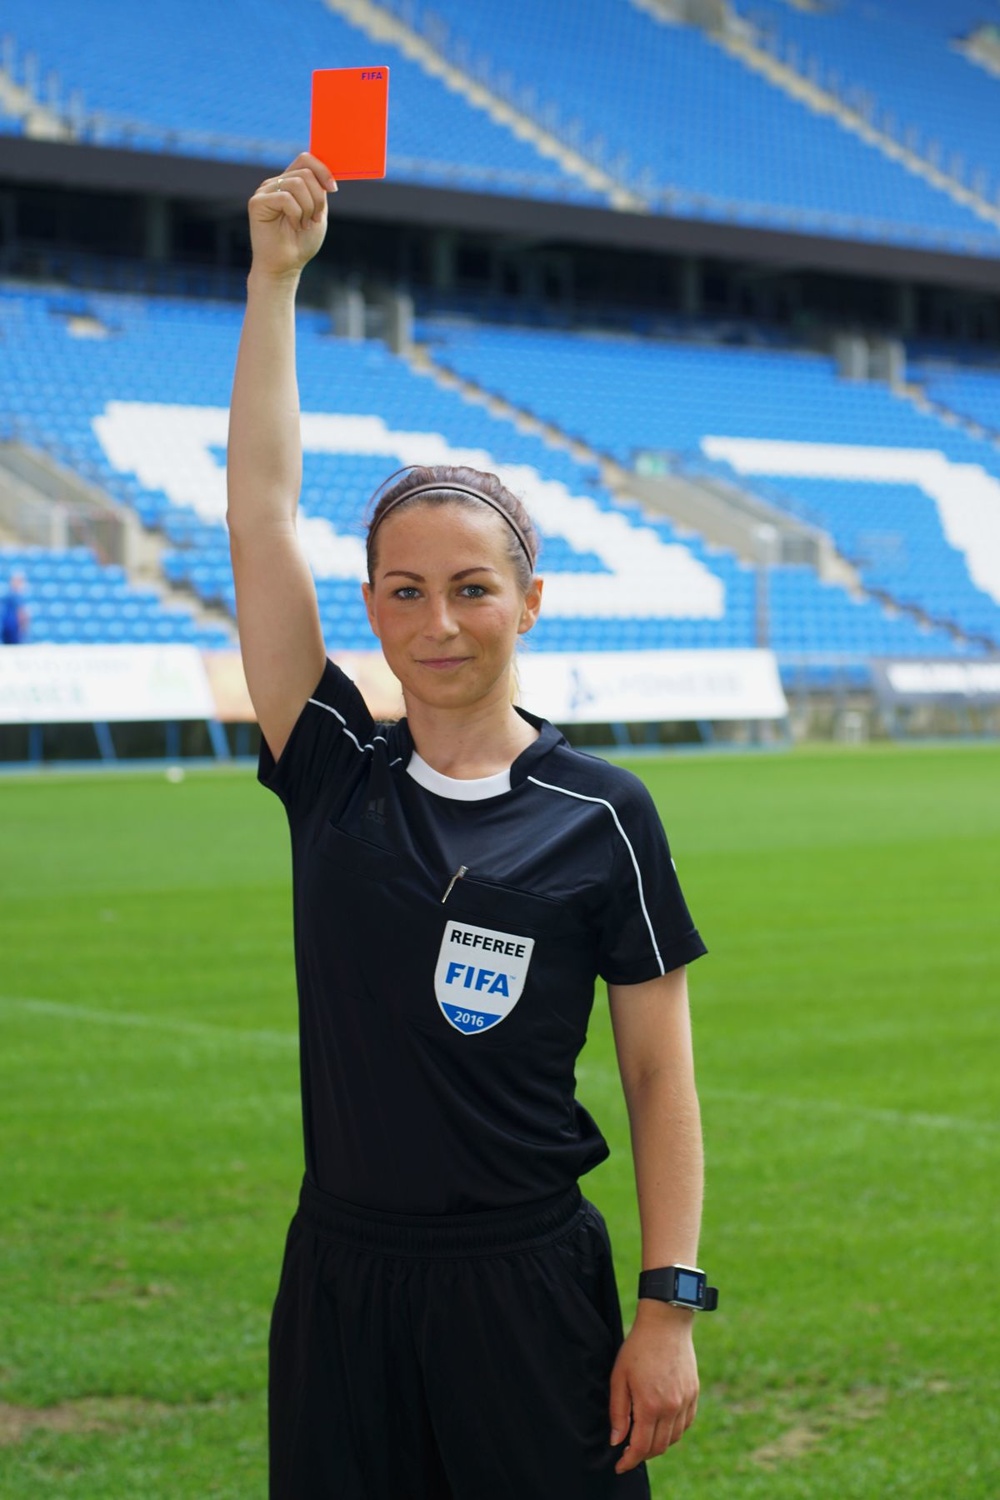 Refereeing World FIFA Women's World Cup 2019 Qualifiers – UEFA